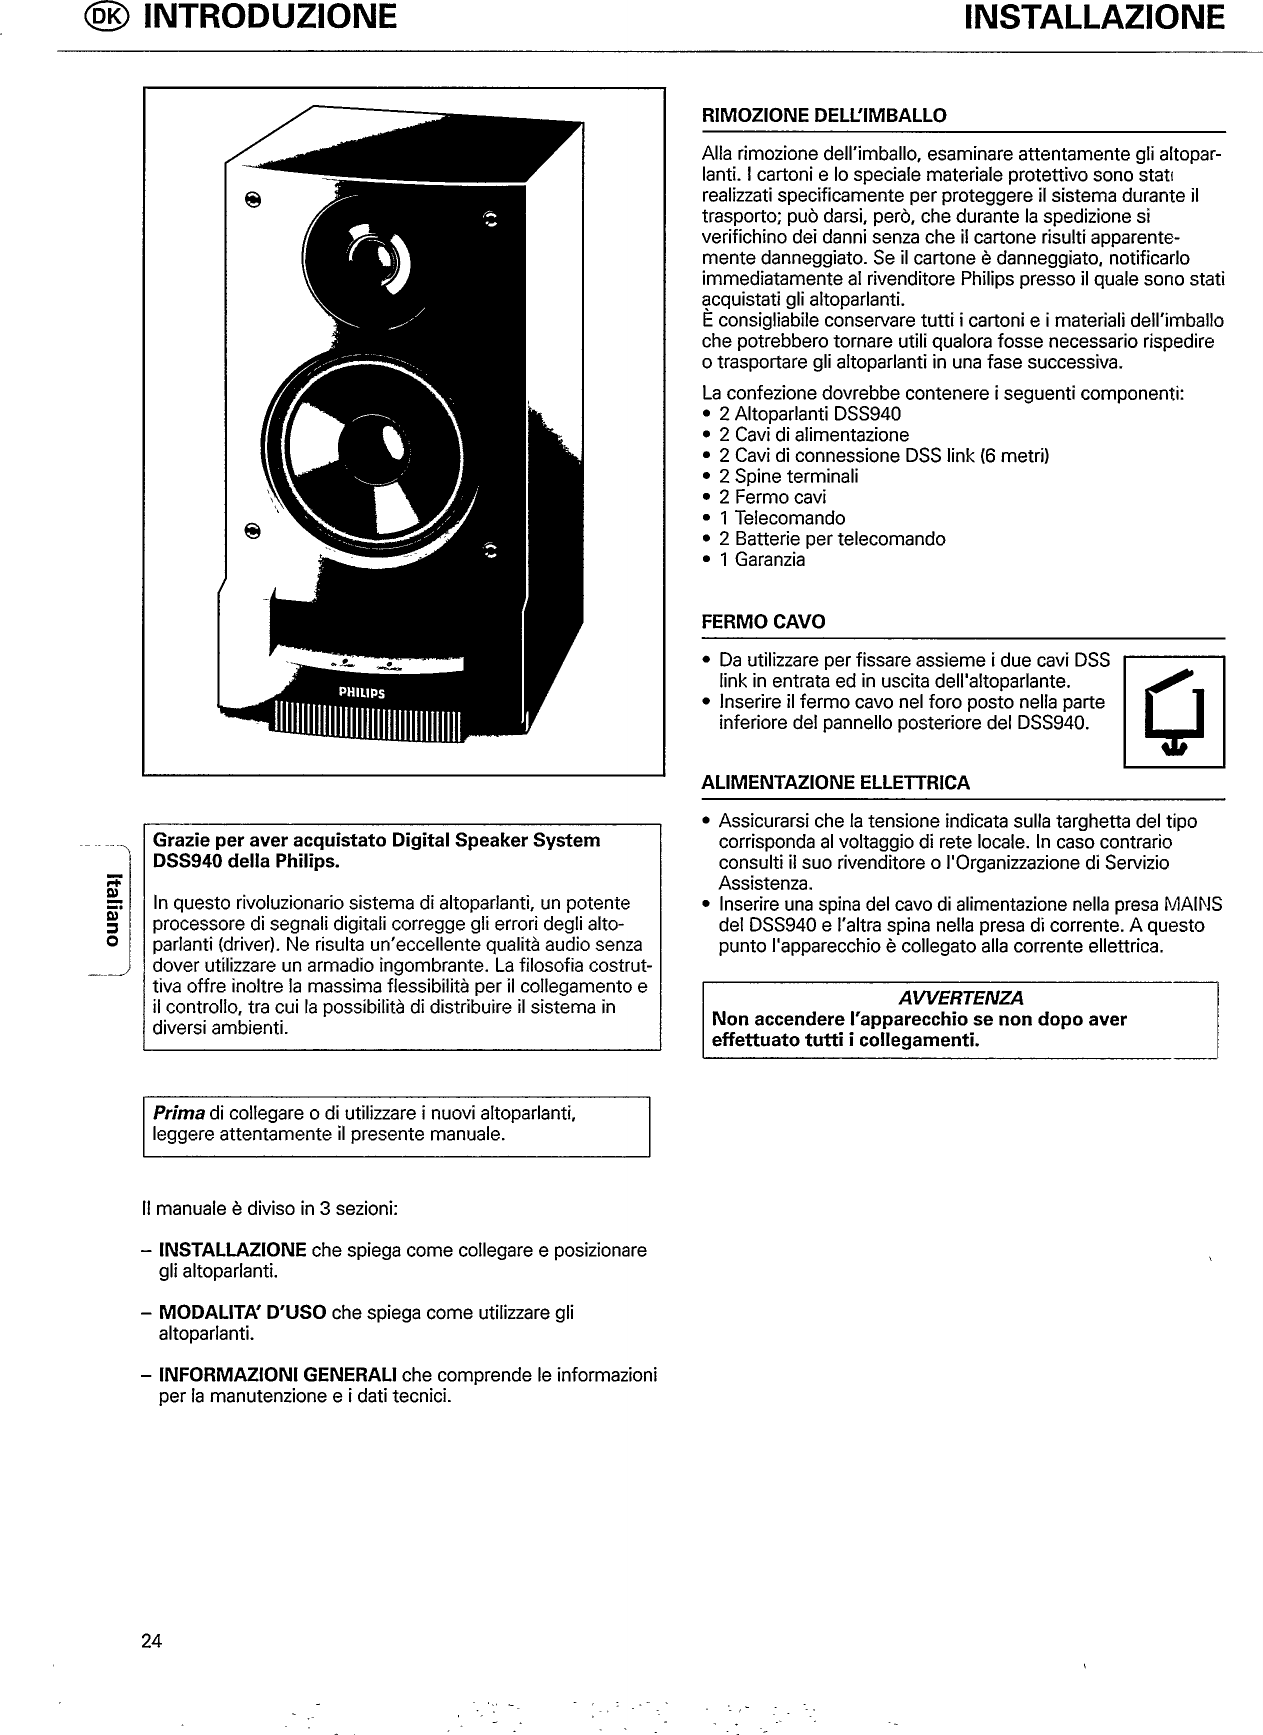 Page 4 of 8 - Philips  DSS940 Dfu Ita